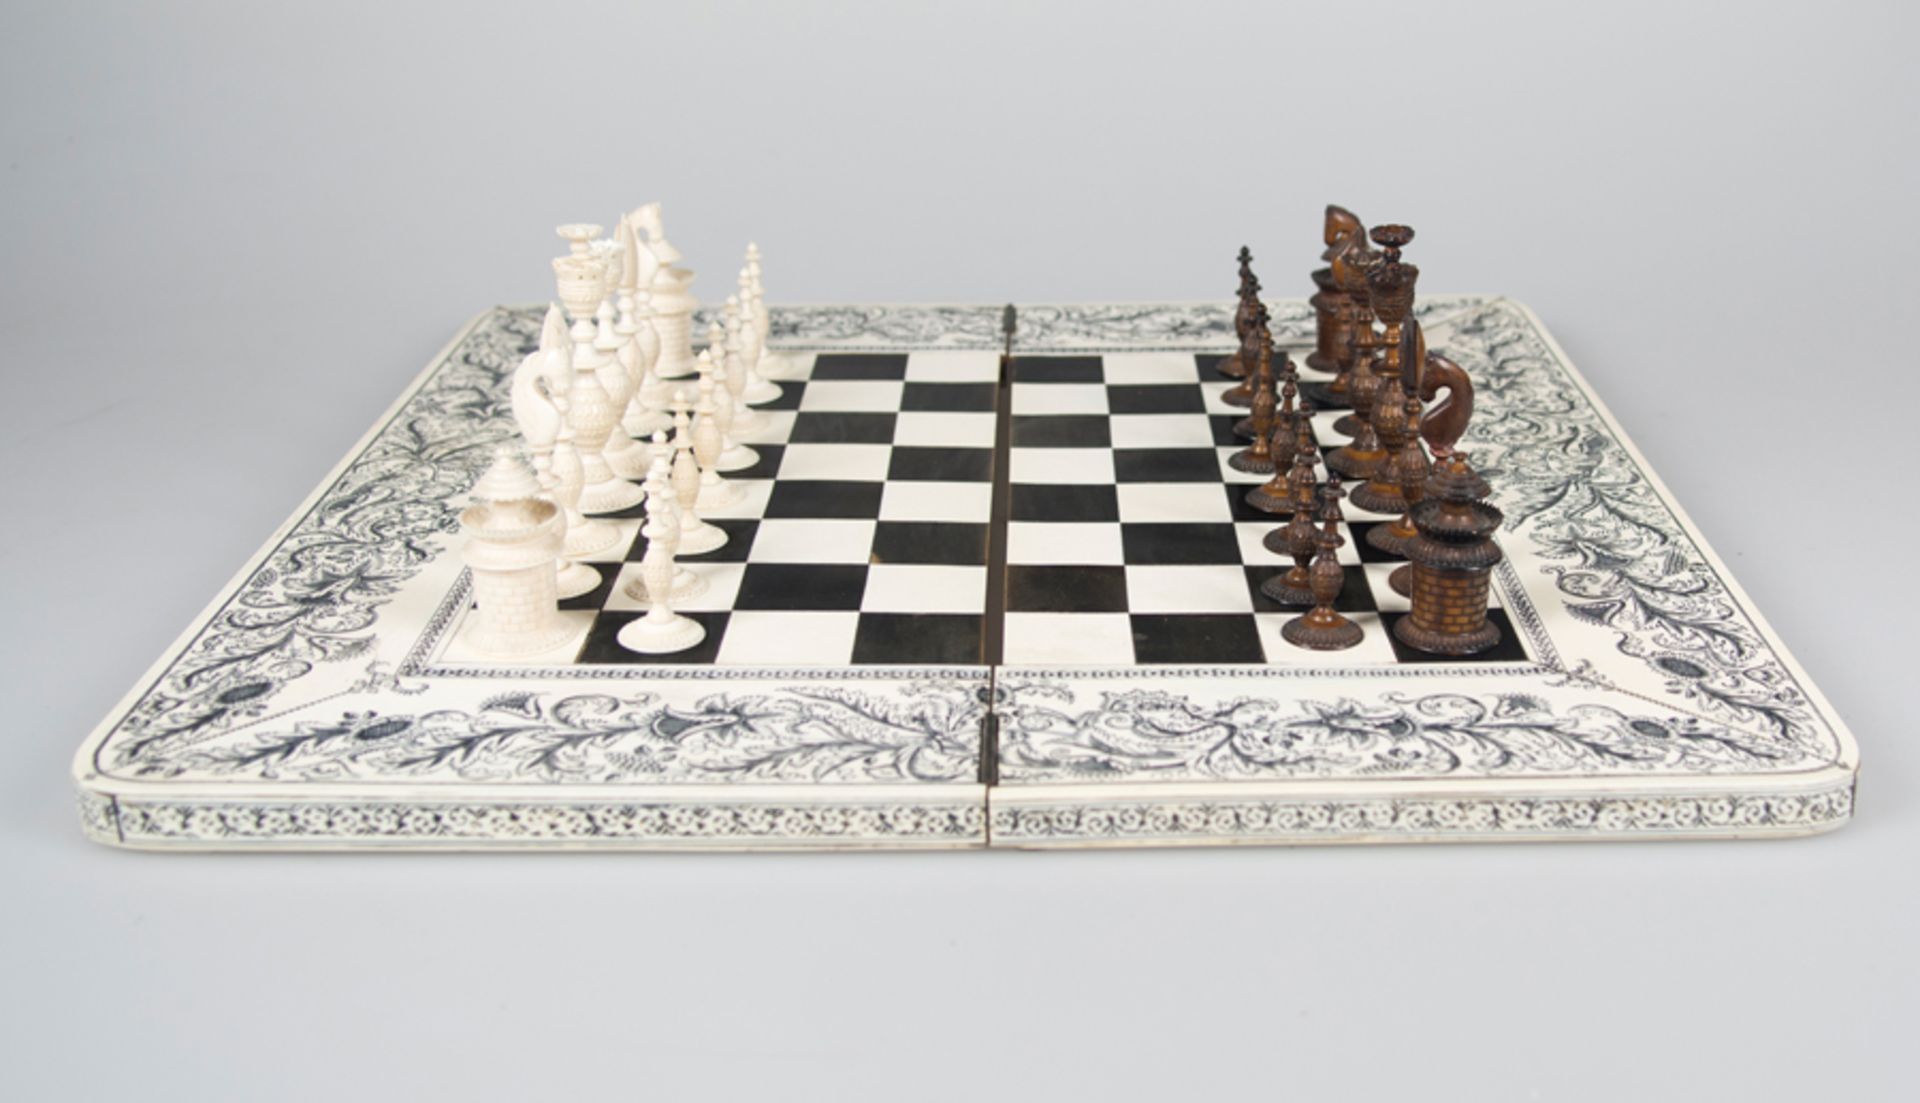 Complete chess set in wood, stained ivory and in its color. Anglo-Indian School. Circa 1850. - Image 3 of 8